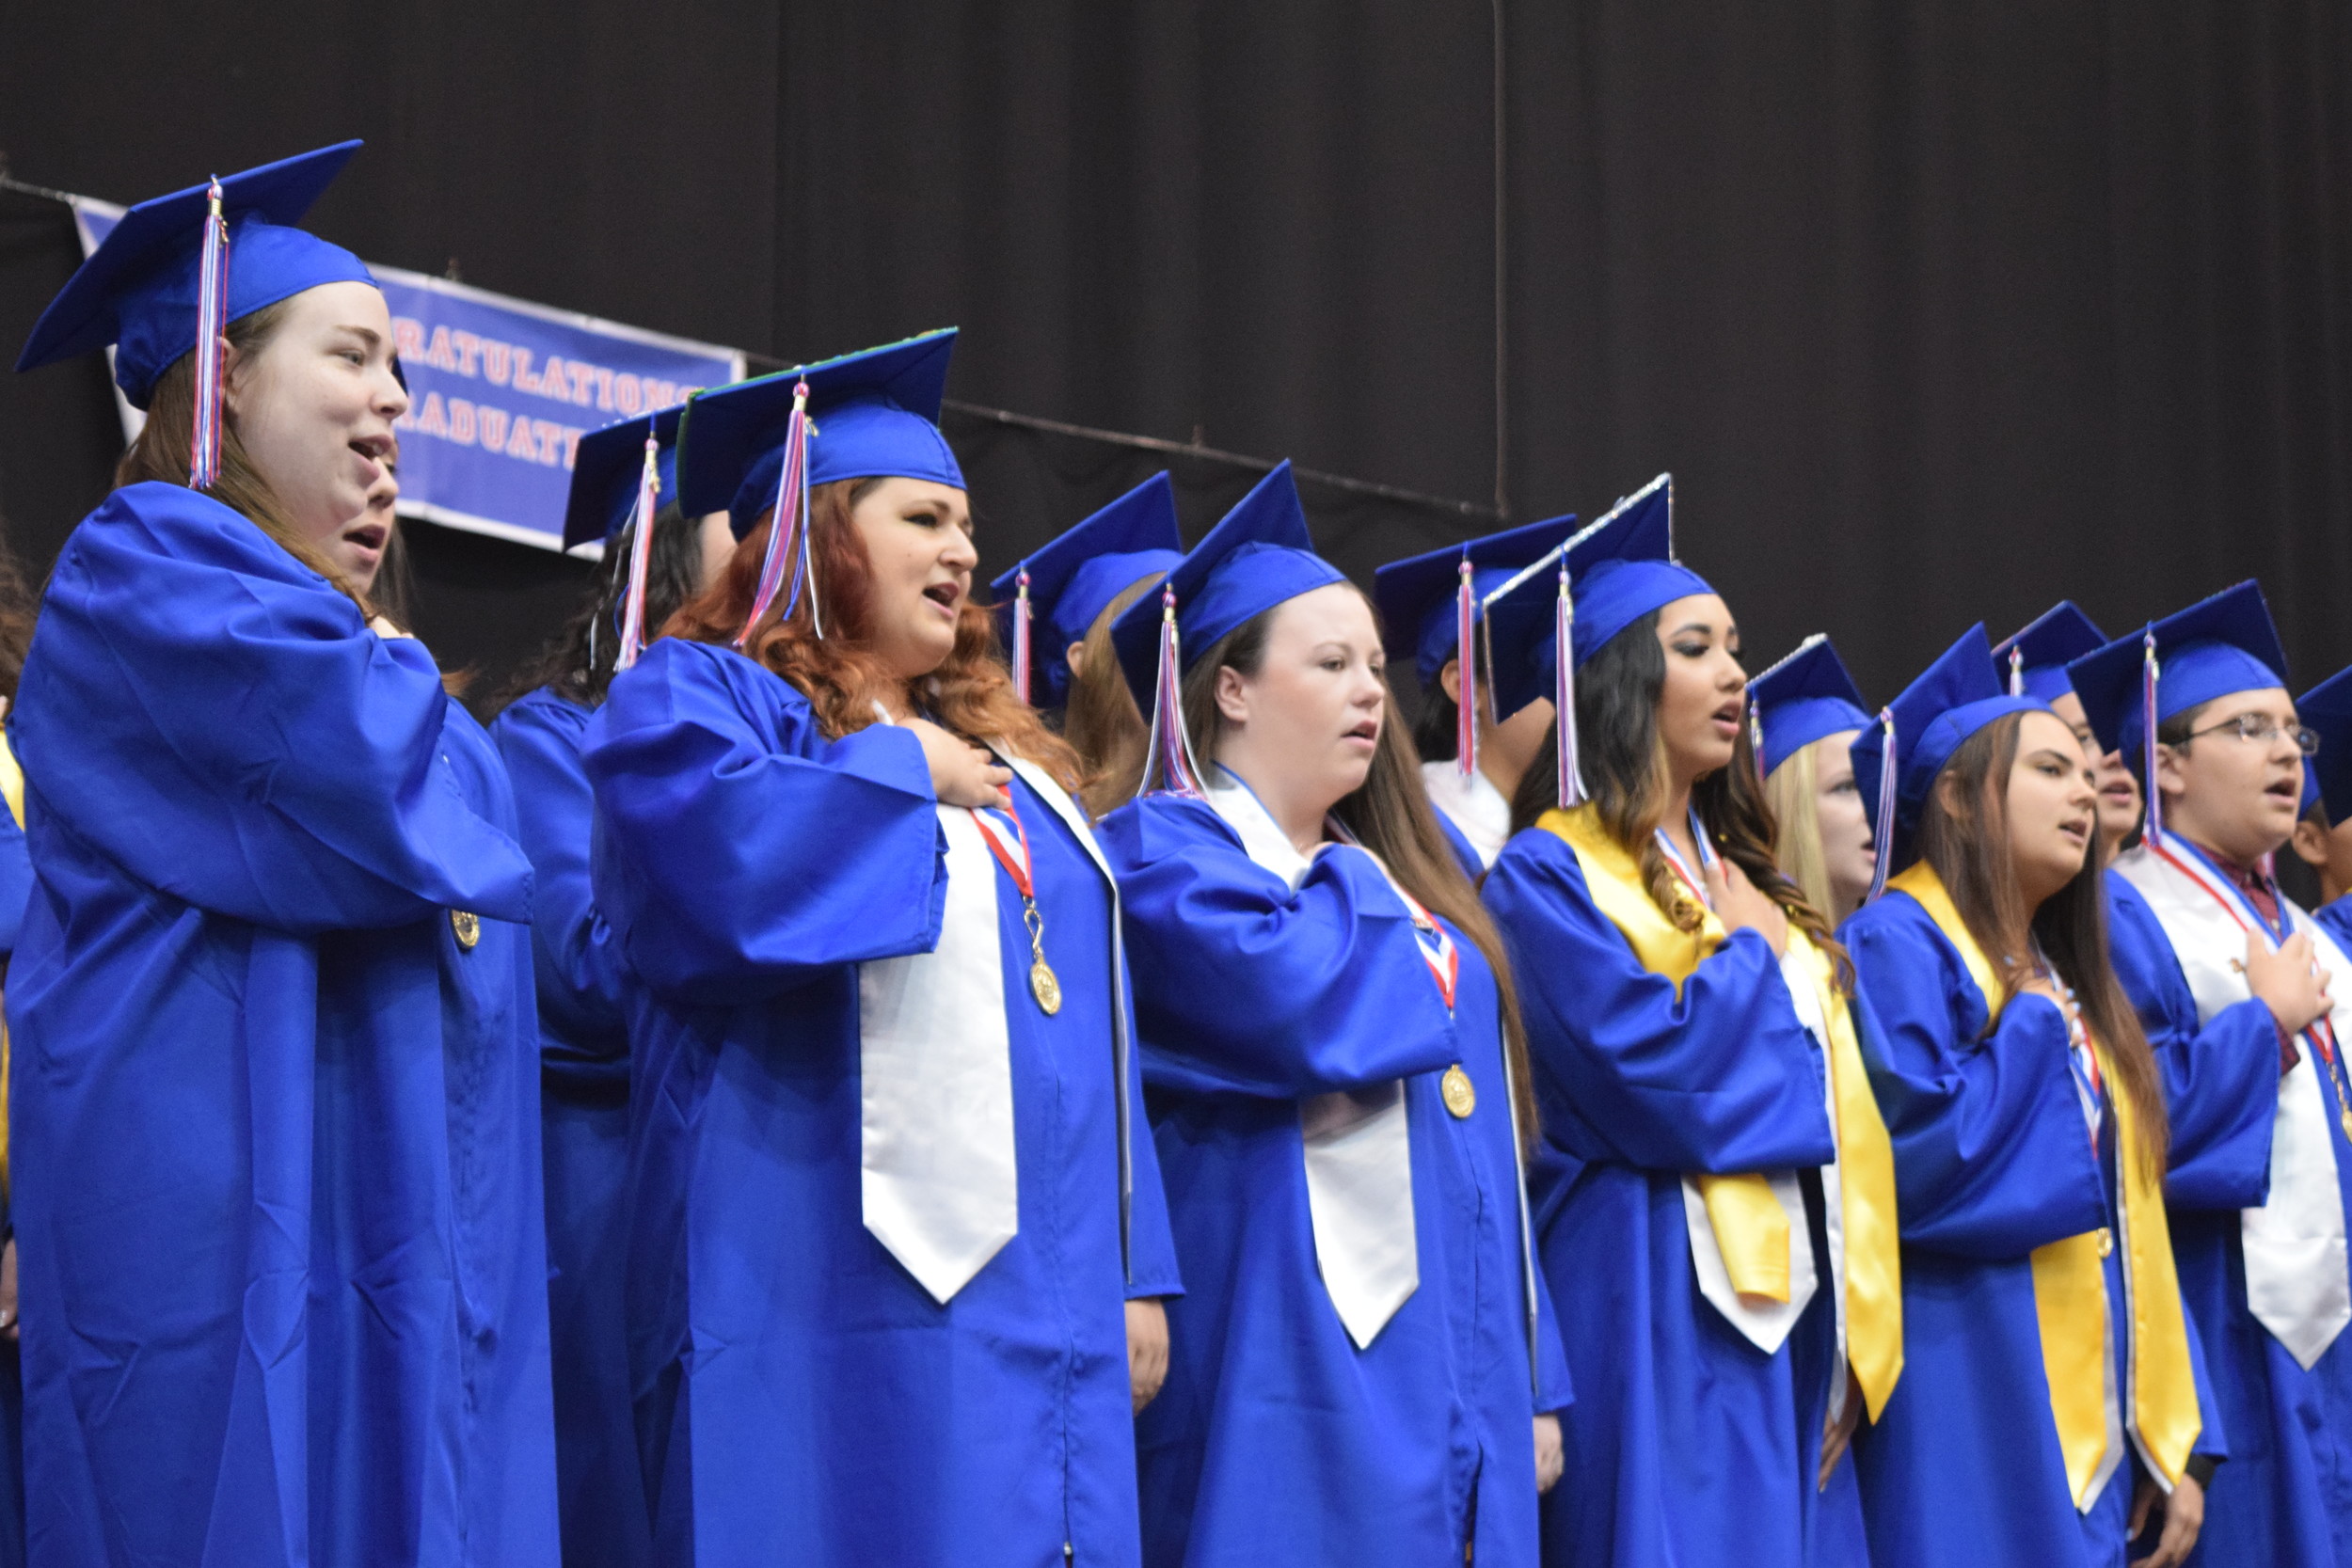 Senior members from the chorus sang the “Star-Spangled Banner” to open up the graduation ceremony.